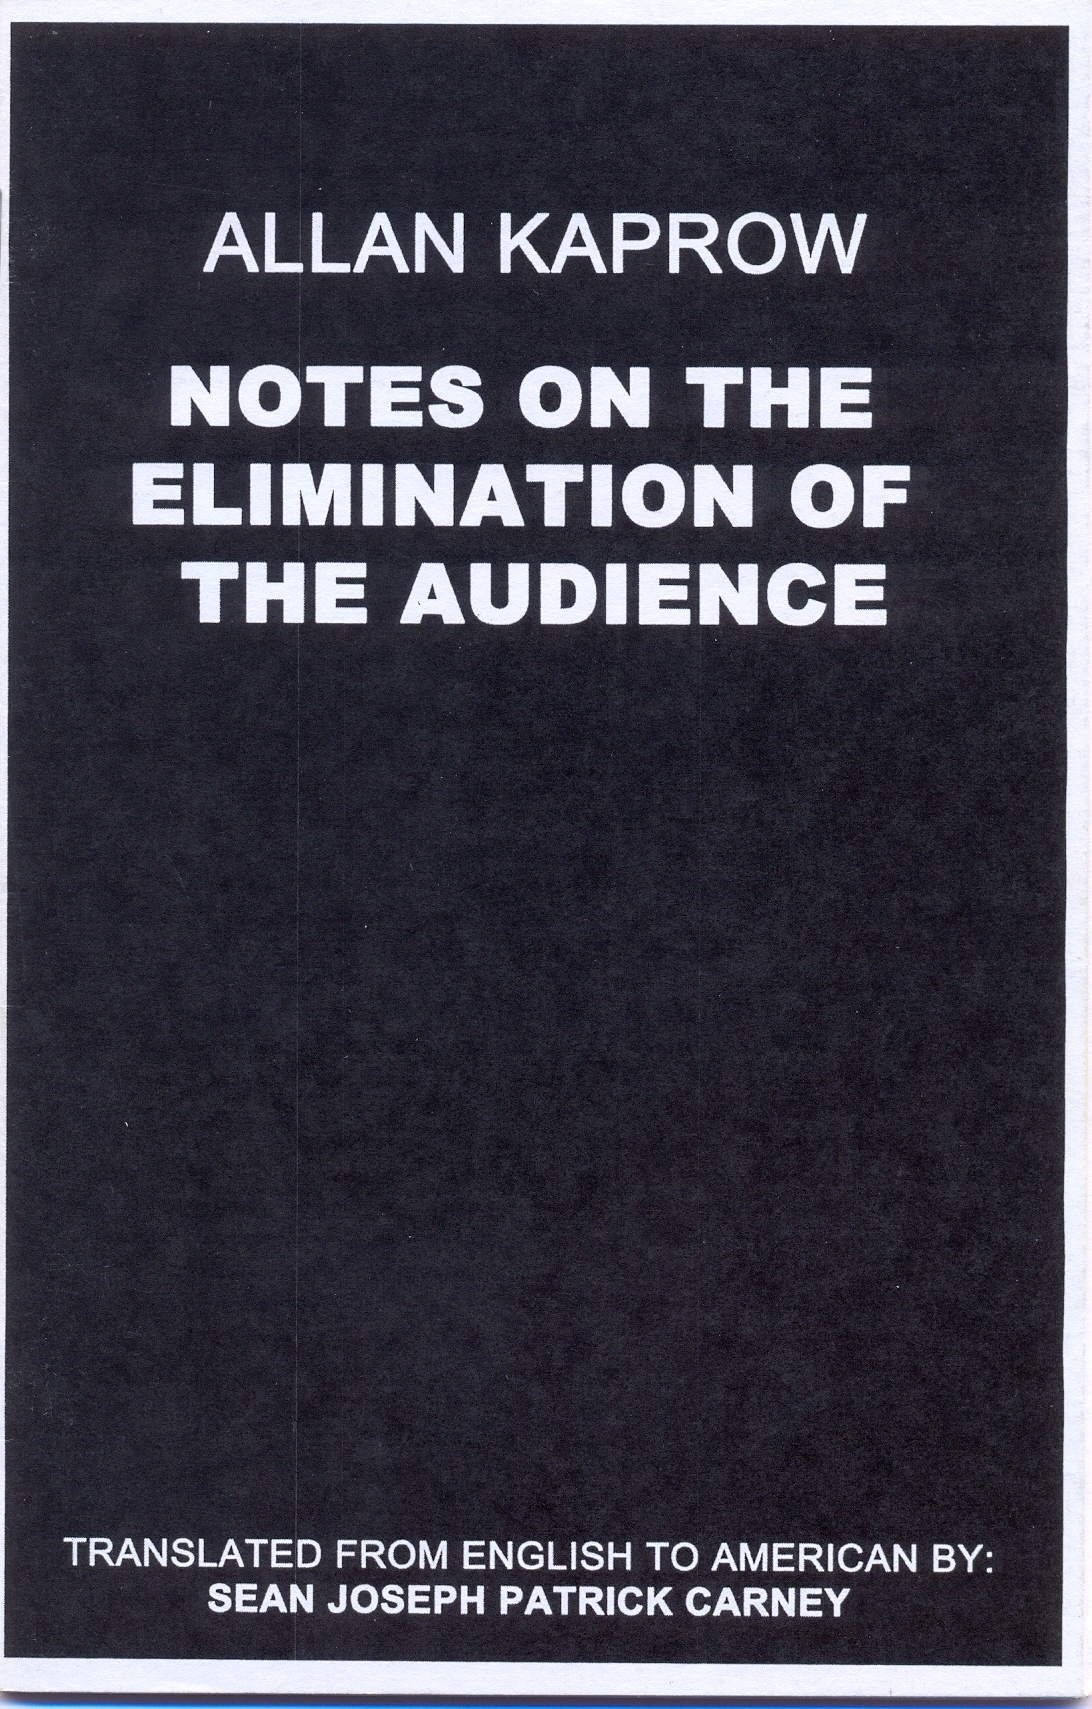 Notes on the elimination of audience